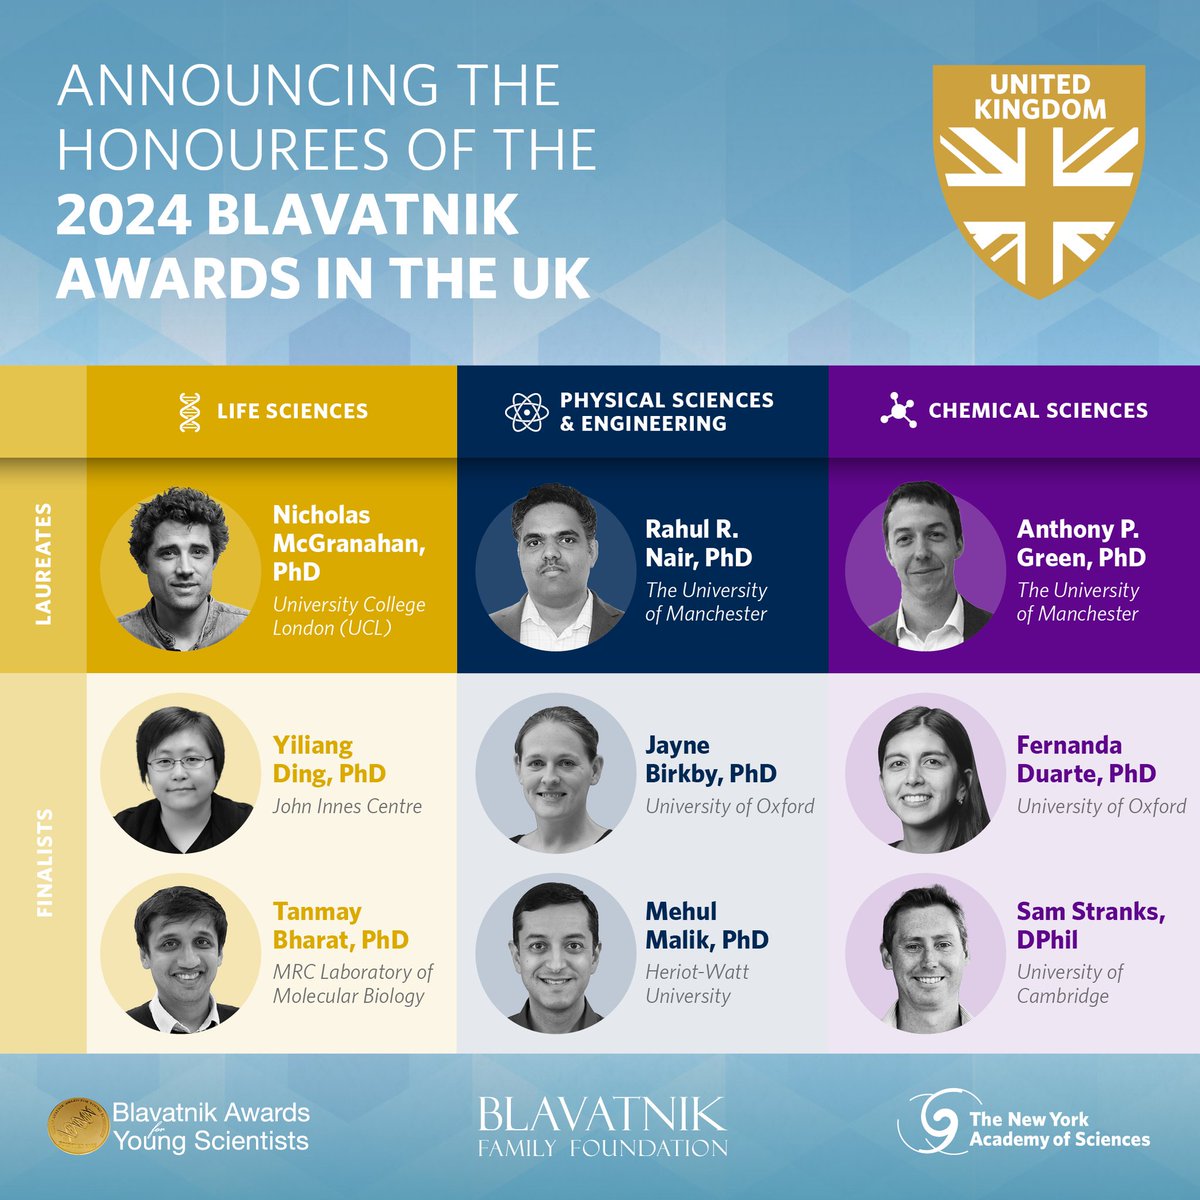 🎉The Blavatnik Awards and @nyasciences are excited to announce the Honourees of the 2024 Blavatnik Awards in the UK! Please join us in congratulating these nine incredible scientists sparking innovations that will transform our future world. Learn more: blavatnikawards.org/news/items/pre…